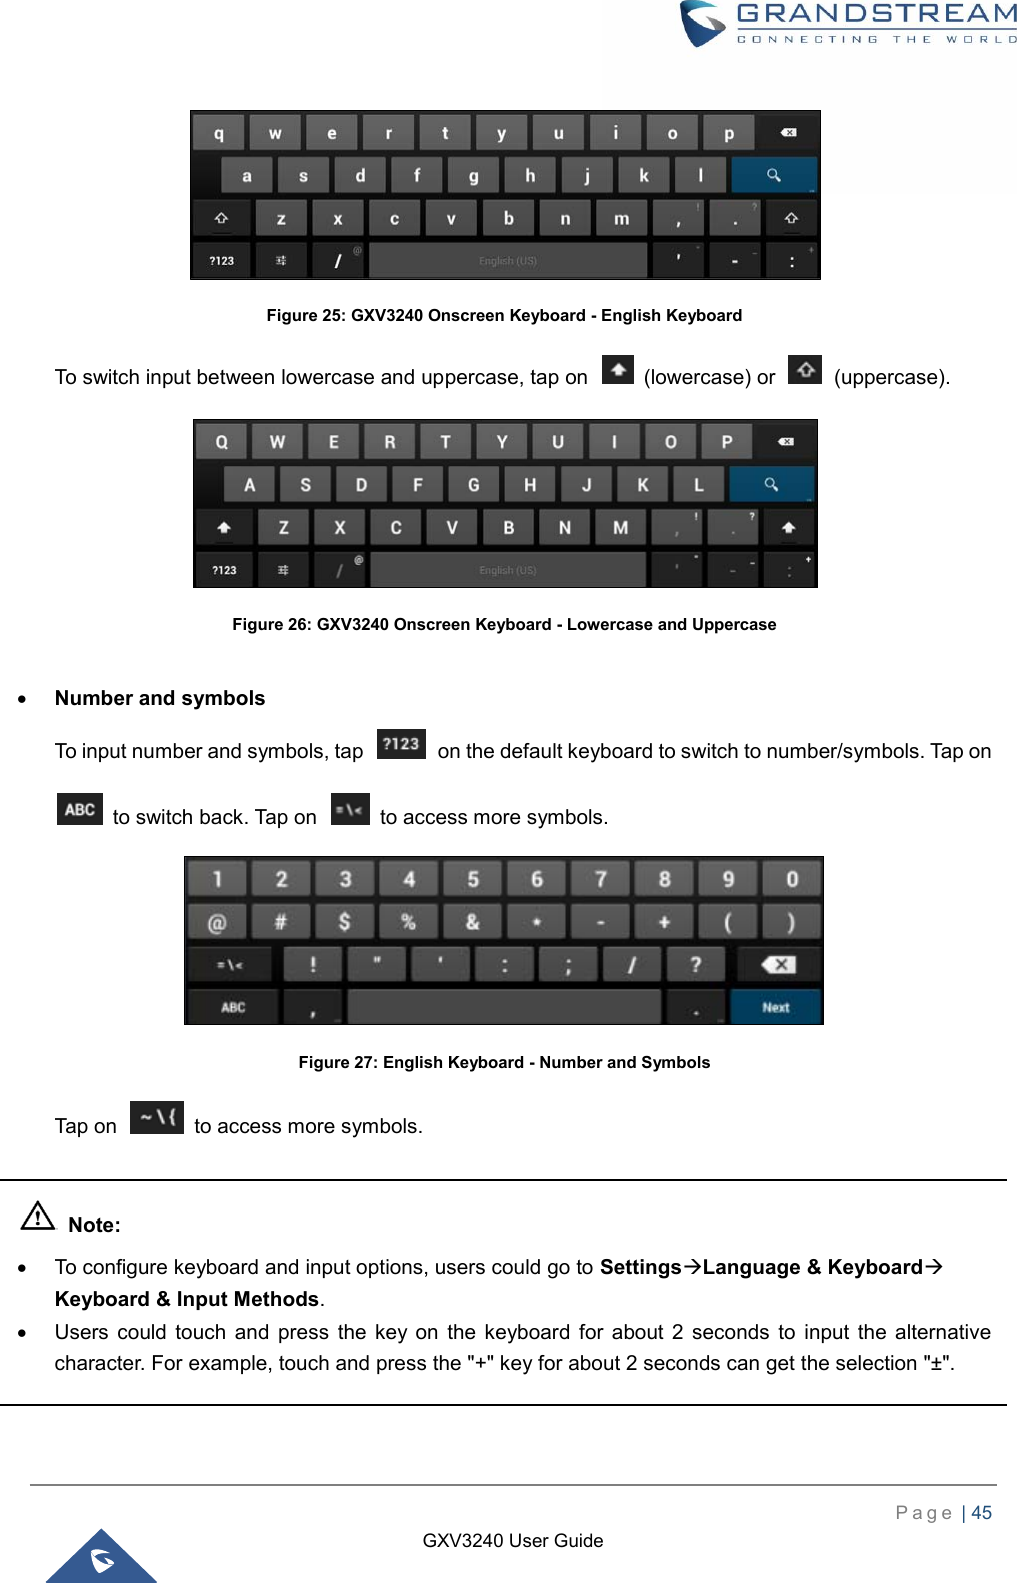    P a g e  | 45    GXV3240 User Guide   Figure 25: GXV3240 Onscreen Keyboard - English Keyboard To switch input between lowercase and uppercase, tap on    (lowercase) or    (uppercase).  Figure 26: GXV3240 Onscreen Keyboard - Lowercase and Uppercase   Number and symbols To input number and symbols, tap    on the default keyboard to switch to number/symbols. Tap on   to switch back. Tap on    to access more symbols.  Figure 27: English Keyboard - Number and Symbols Tap on    to access more symbols.    Note:   To configure keyboard and input options, users could go to SettingsLanguage &amp; Keyboard Keyboard &amp; Input Methods.   Users  could  touch  and  press  the  key  on  the  keyboard  for  about  2  seconds  to  input  the  alternative character. For example, touch and press the &quot;+&quot; key for about 2 seconds can get the selection &quot;±&quot;.  